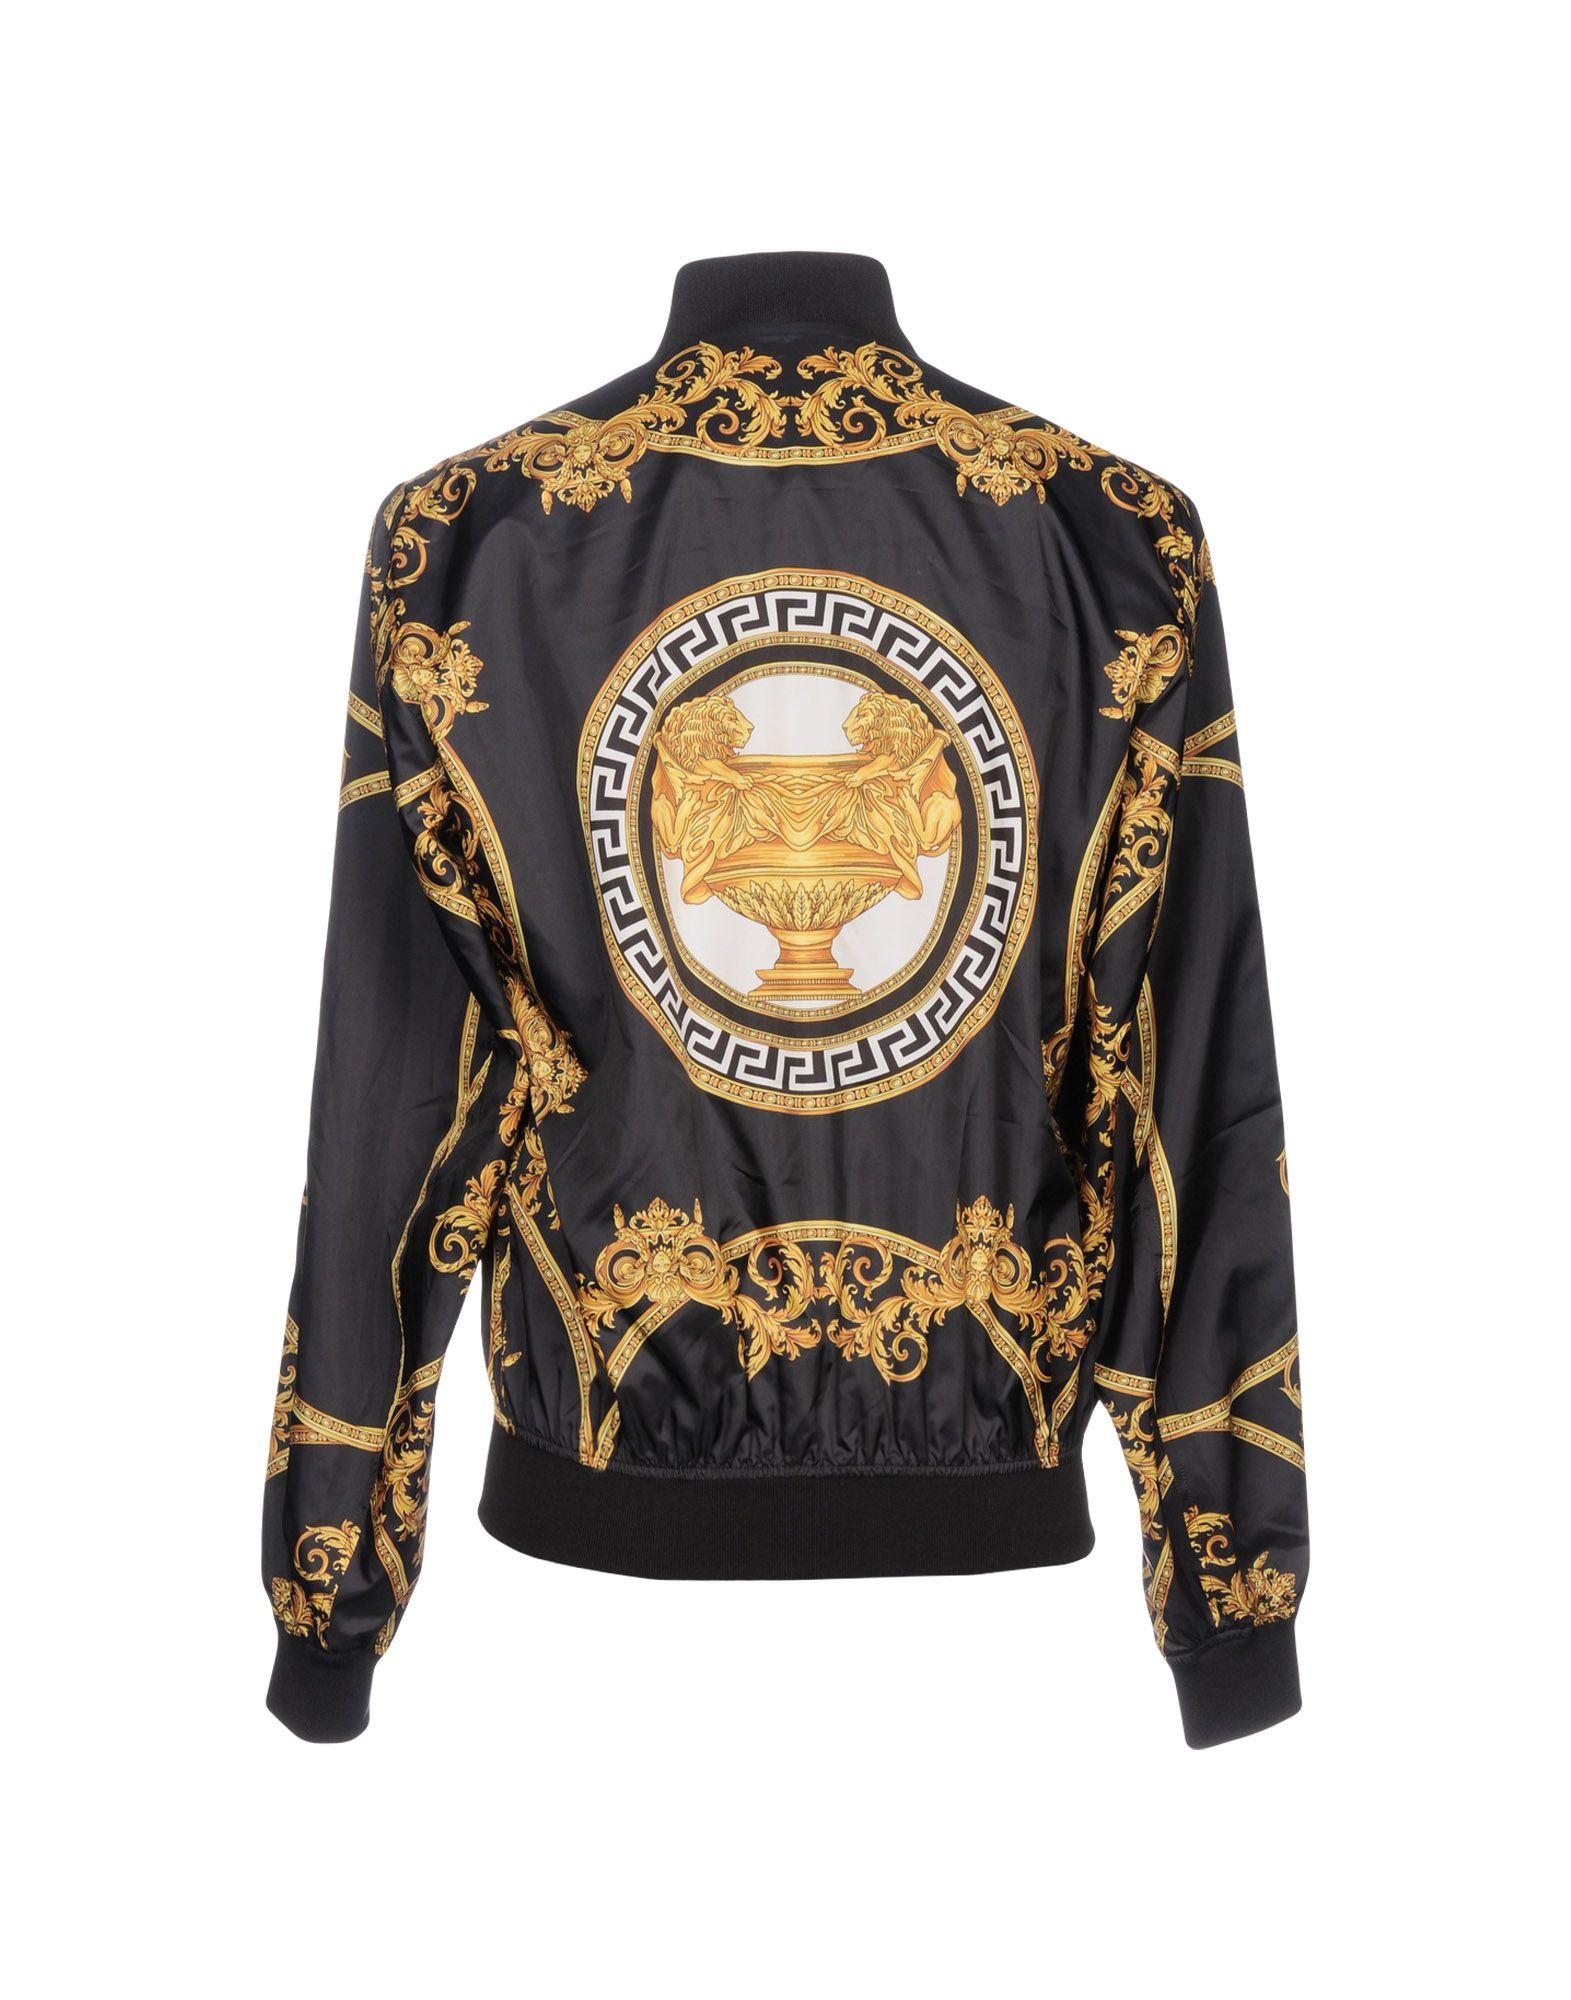 VERSACE 

BRAND NEW VERSACE PRINTED BOMBER JACKET as seen on Bruno Mars.

Demonstrate your taste for luxurious accessories and your love for Versace signed pieces with this rich jacket.
A timeless yet trendy coat that's sure to turn heads. 
Color: